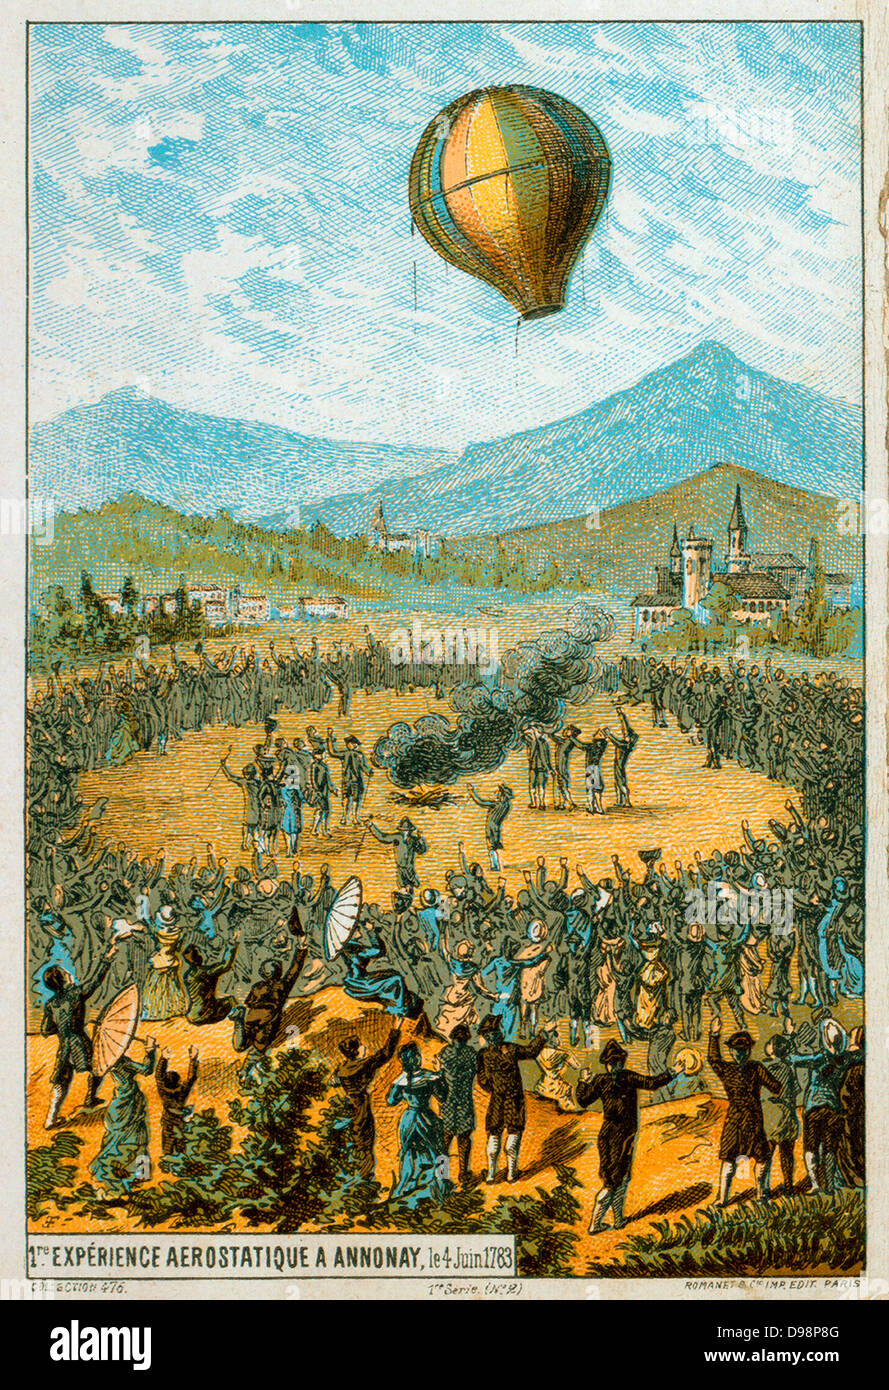 Joseph-Michel and Jacques-Etienne Montgolfier, French brothers, inventors of hot air balloon. From collecting card celebrating the centenary of their first public demonstration at Annonay 4 June 1783. Aeronautics Flying Aviation Ballooning Stock Photo